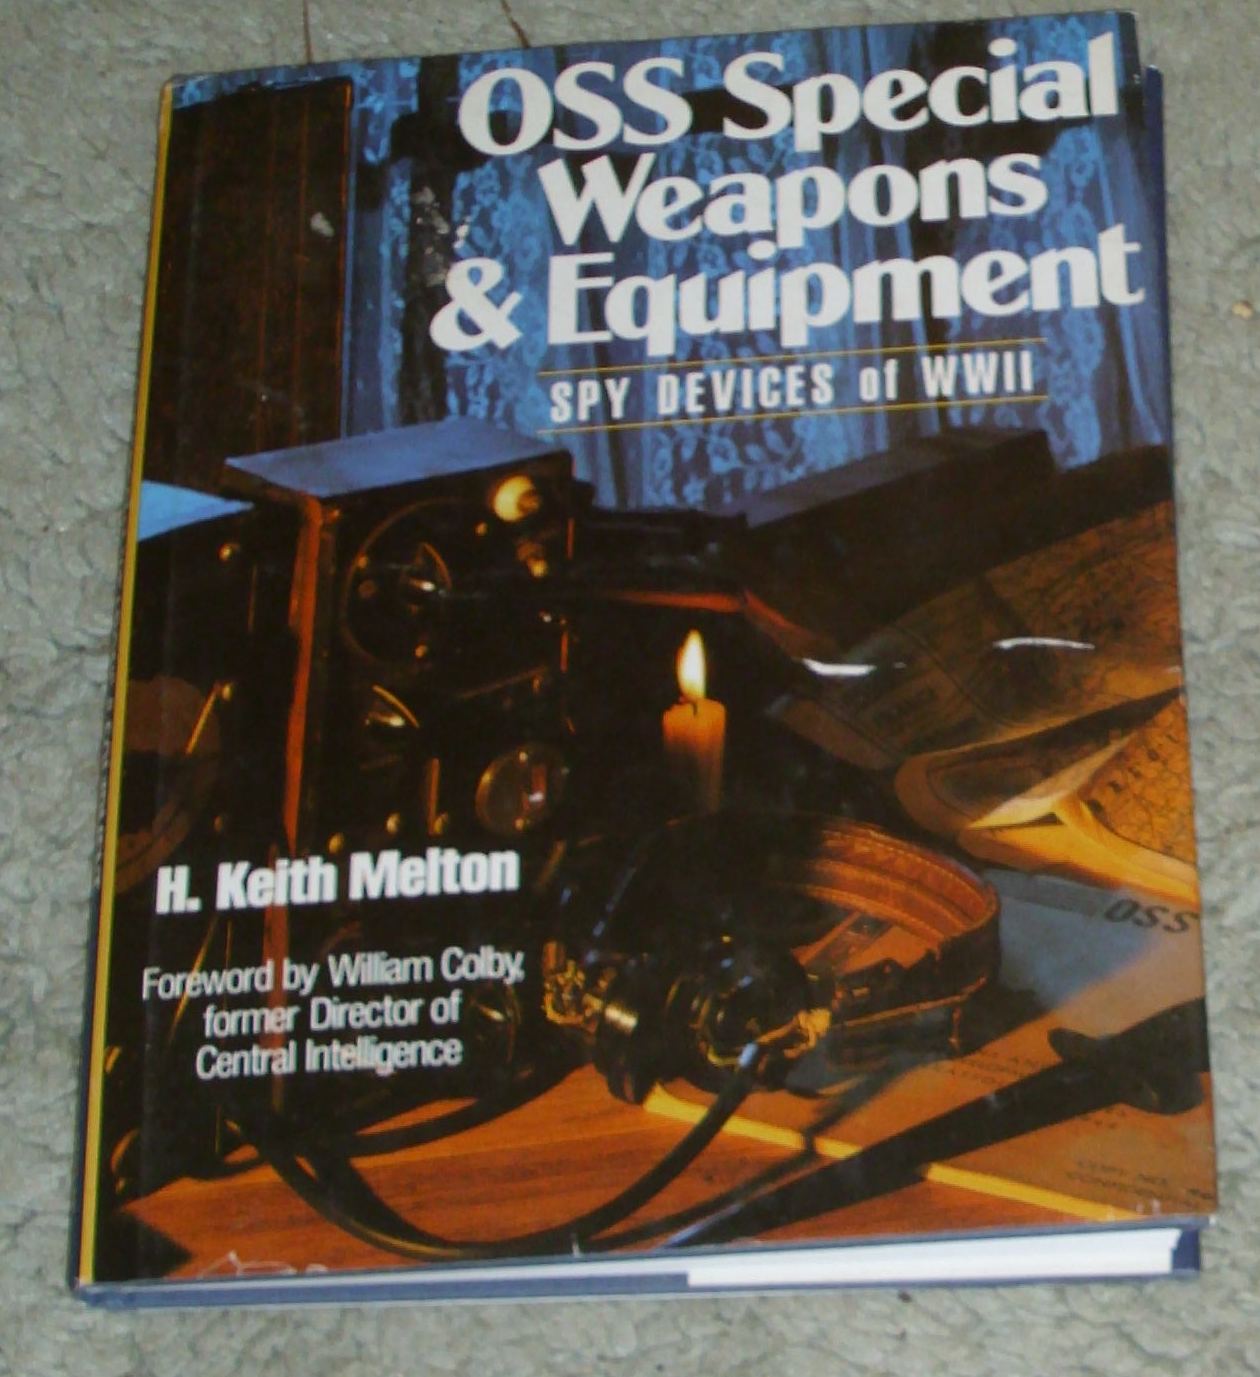 OSS Special Weapons & Equipment